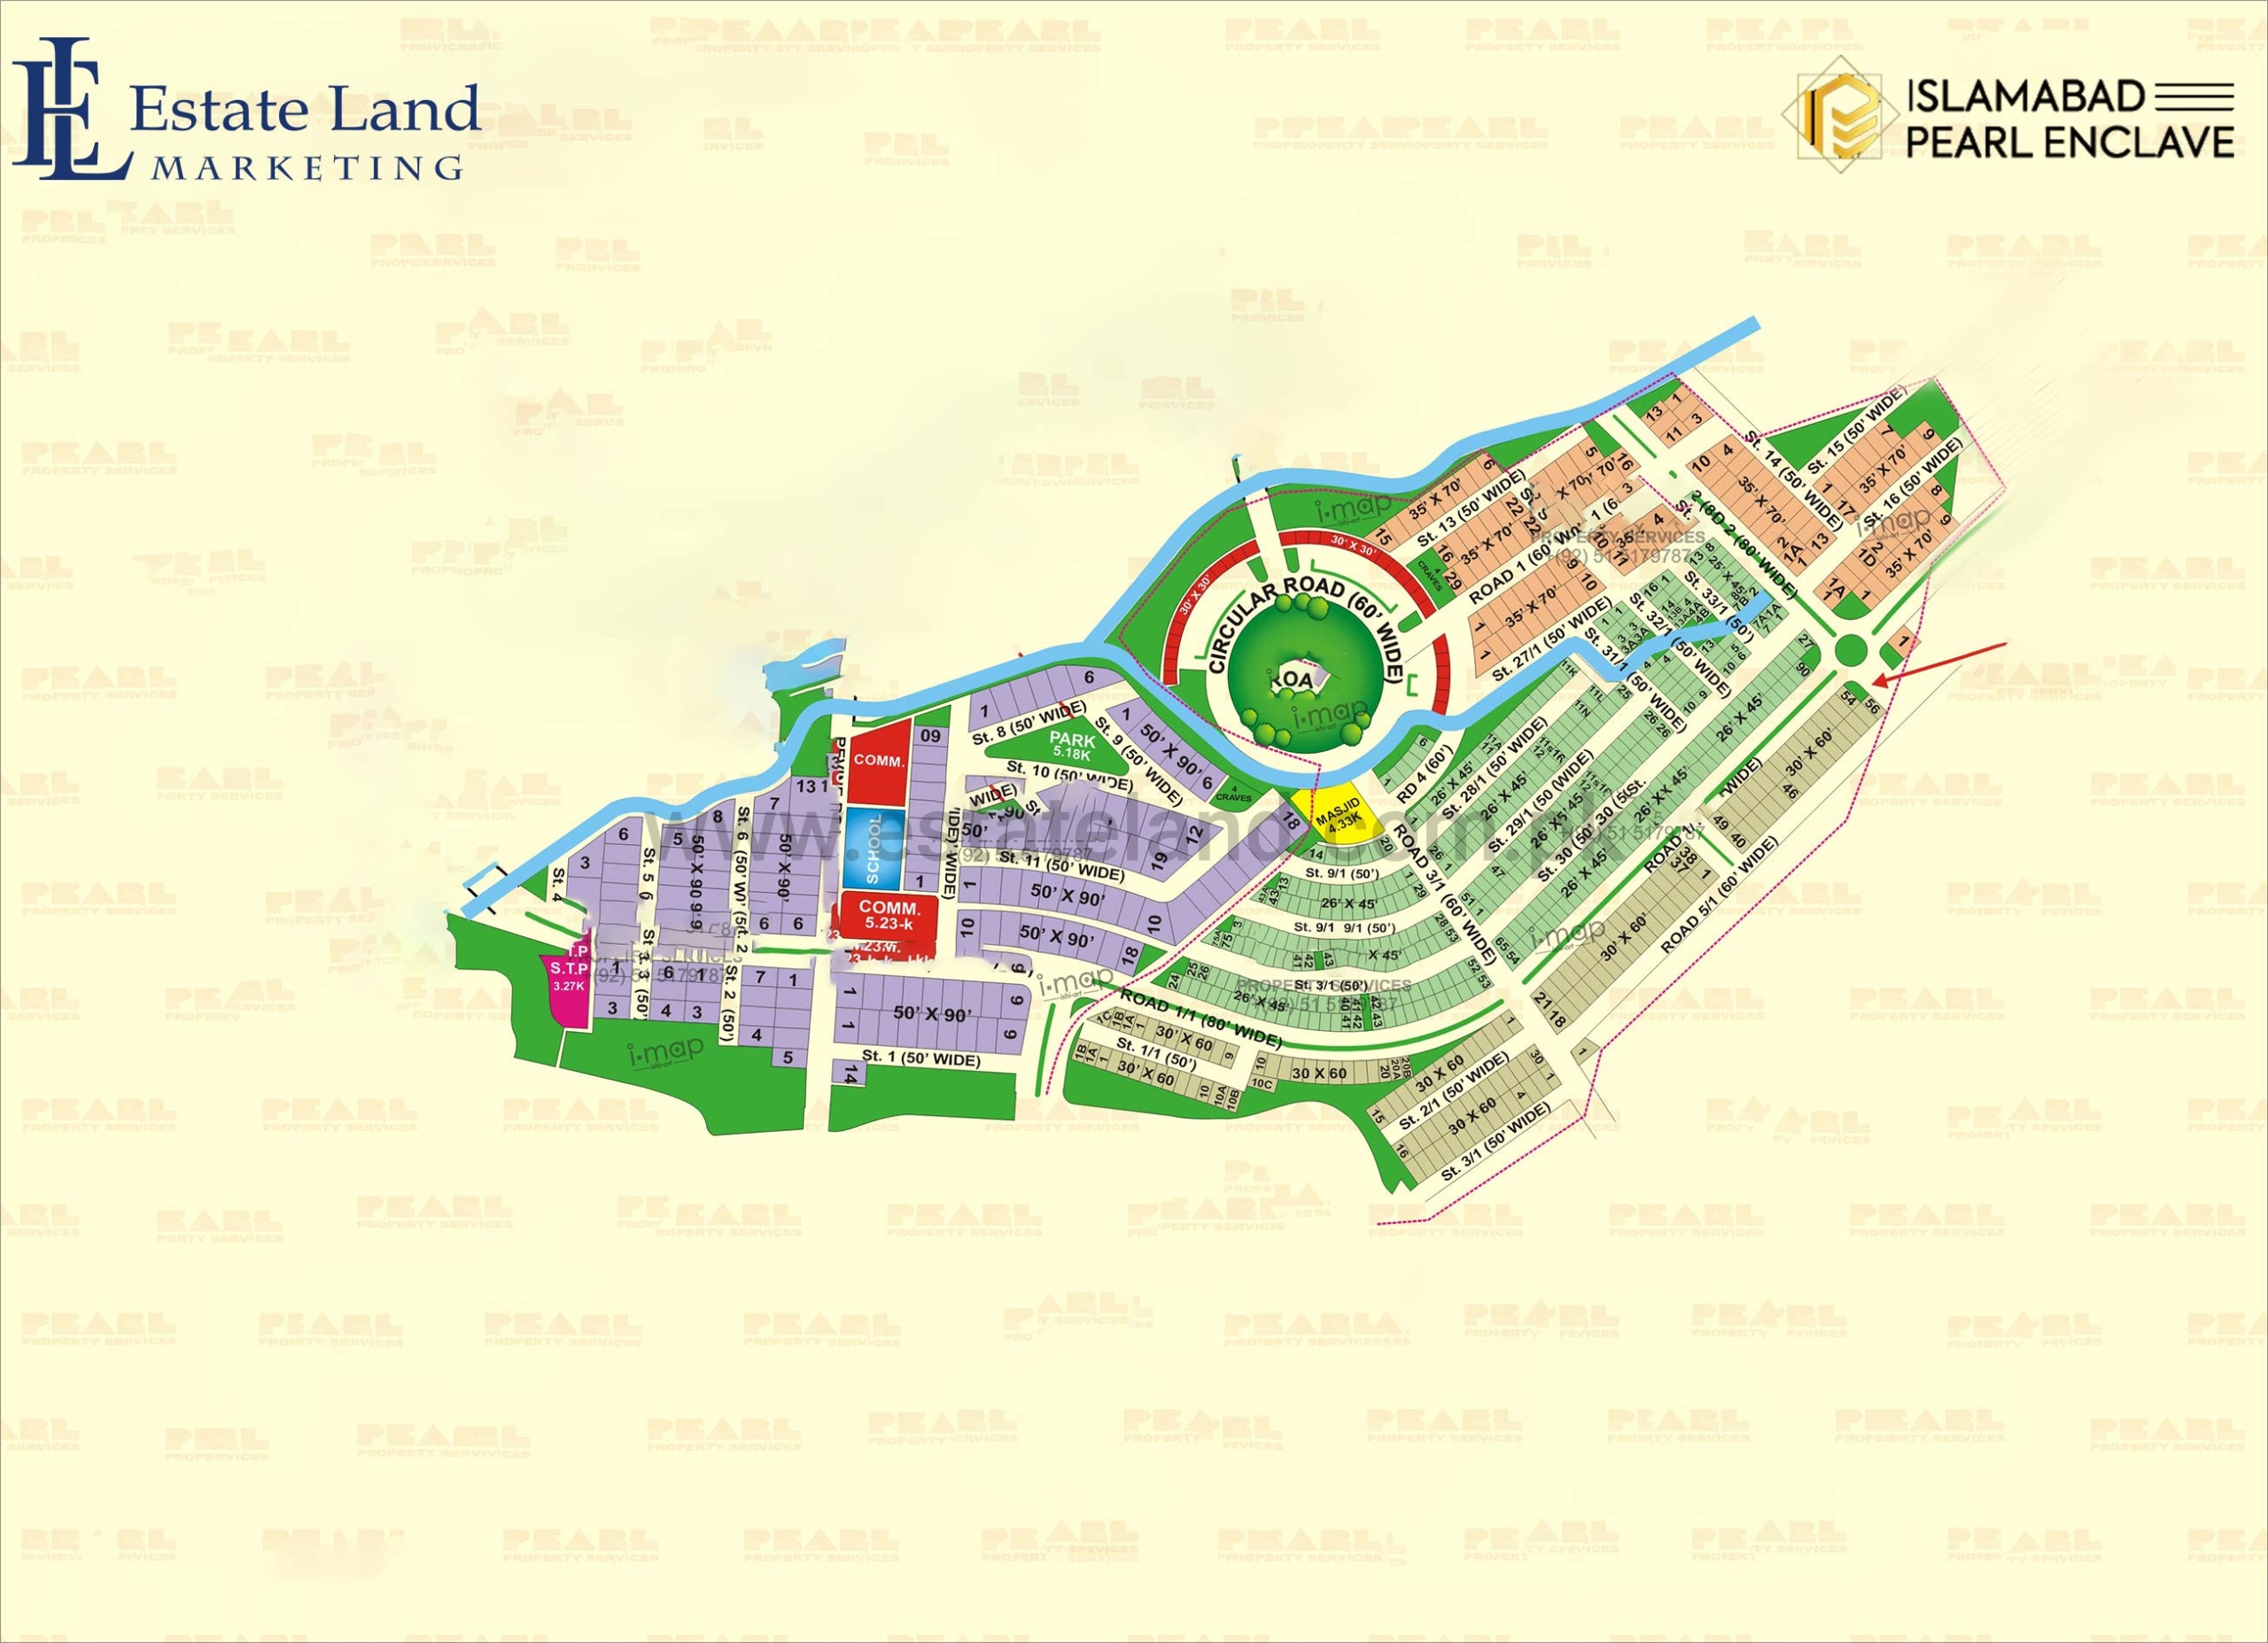 Islamabad Pearl Enclave master plan